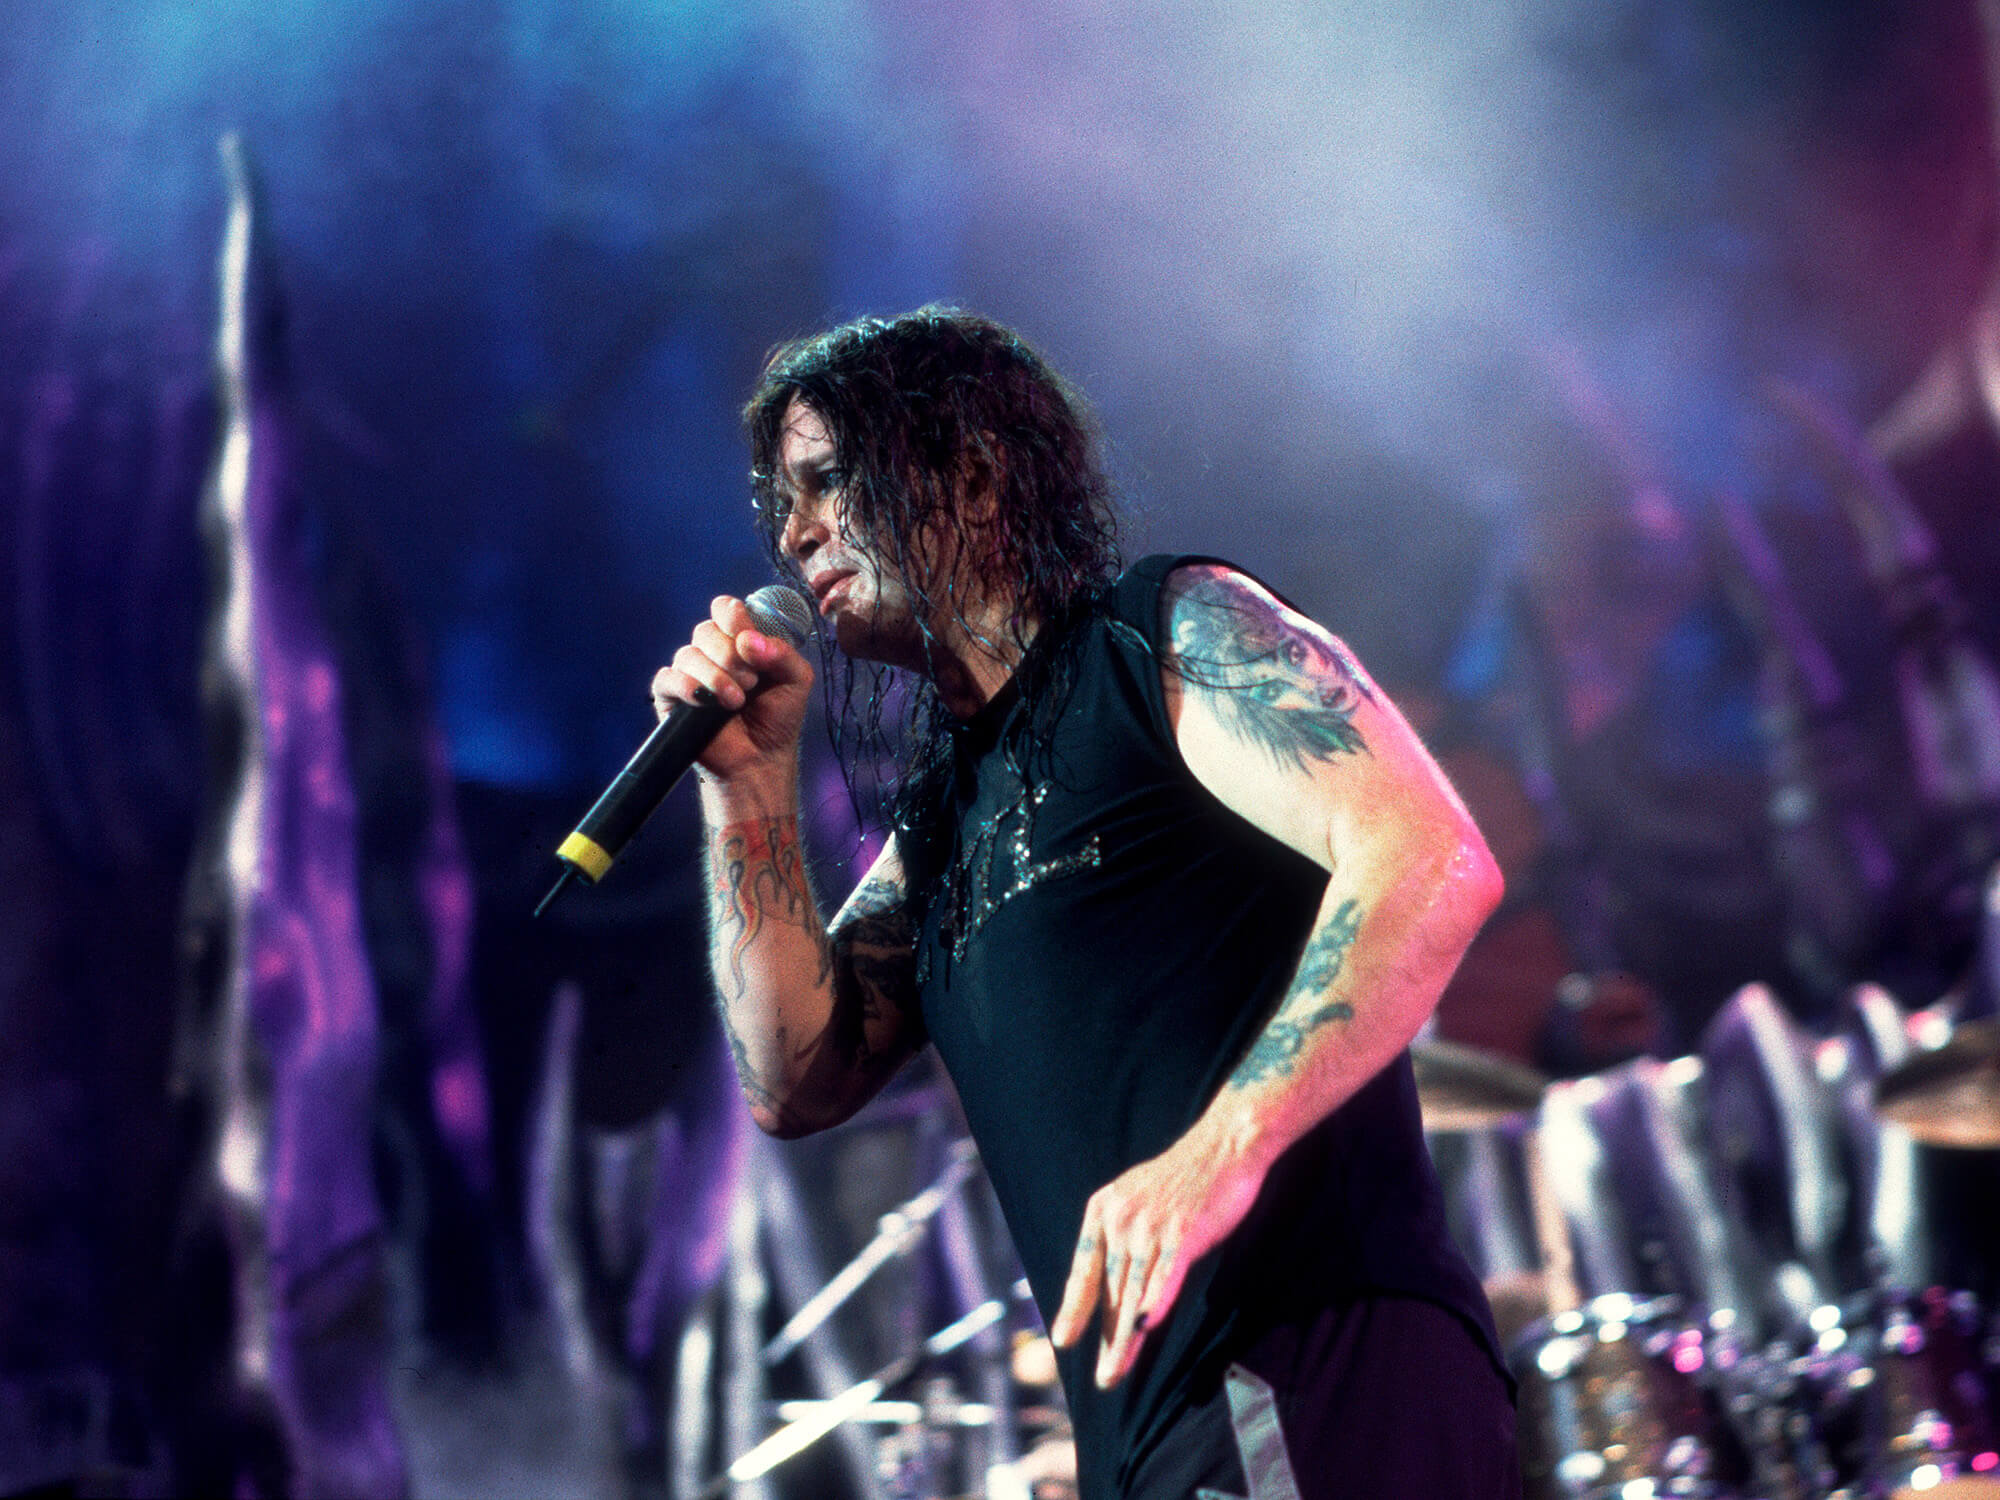 Ozzy Osbourne performs at the World Music Theater, Tinley Park, Chicago, Illinois, August 20, 2000